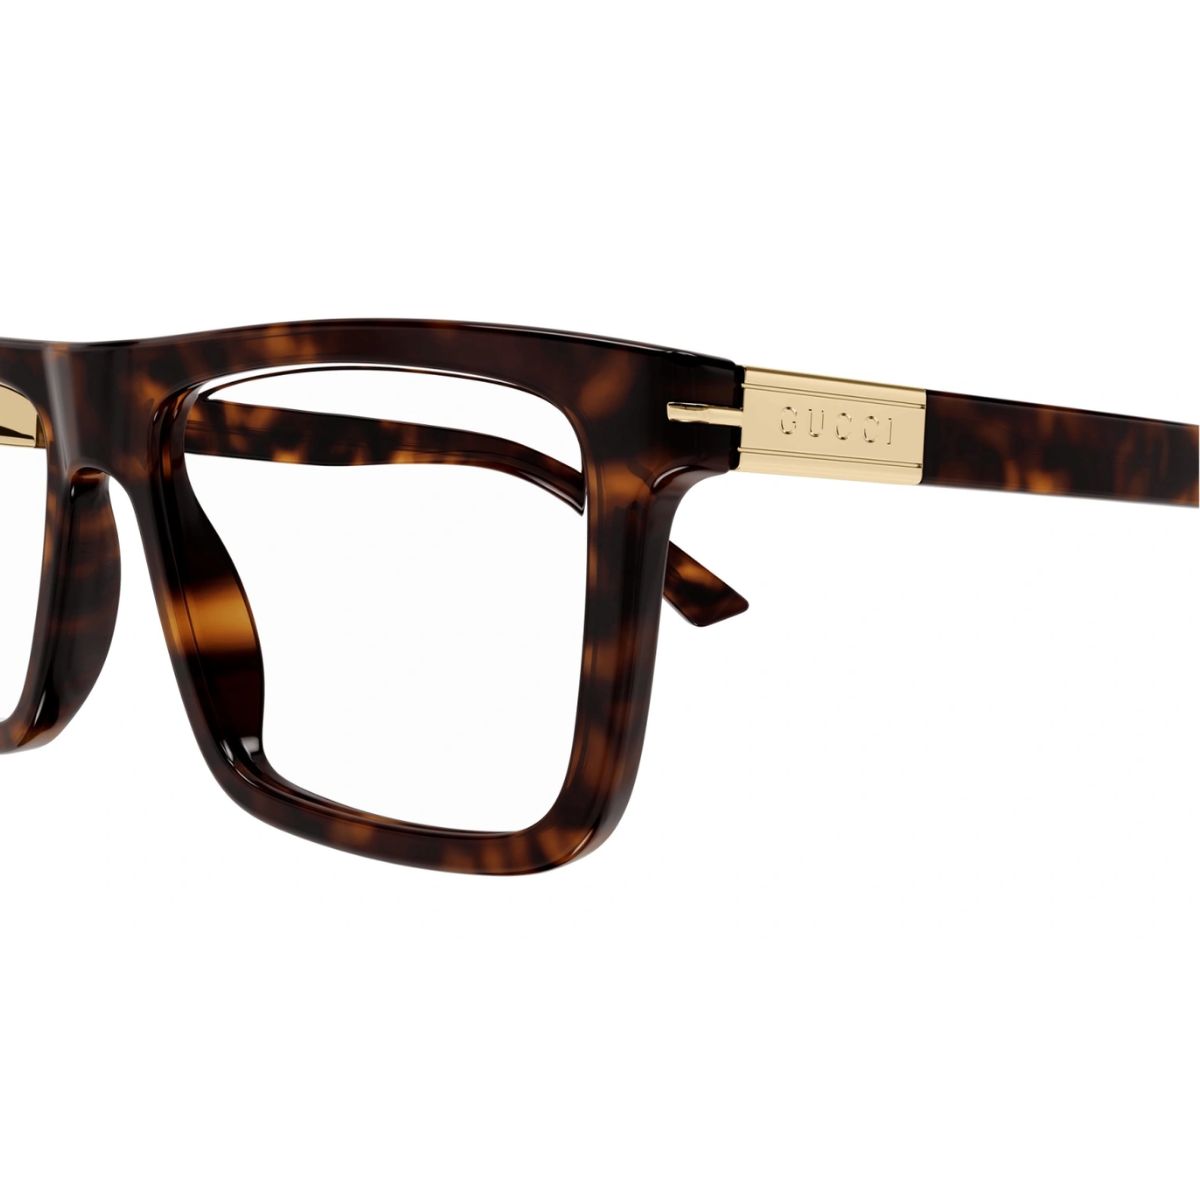 "Gucci 1504O 002 Men's Frames - Crafted for the modern man who appreciates luxury and quality."